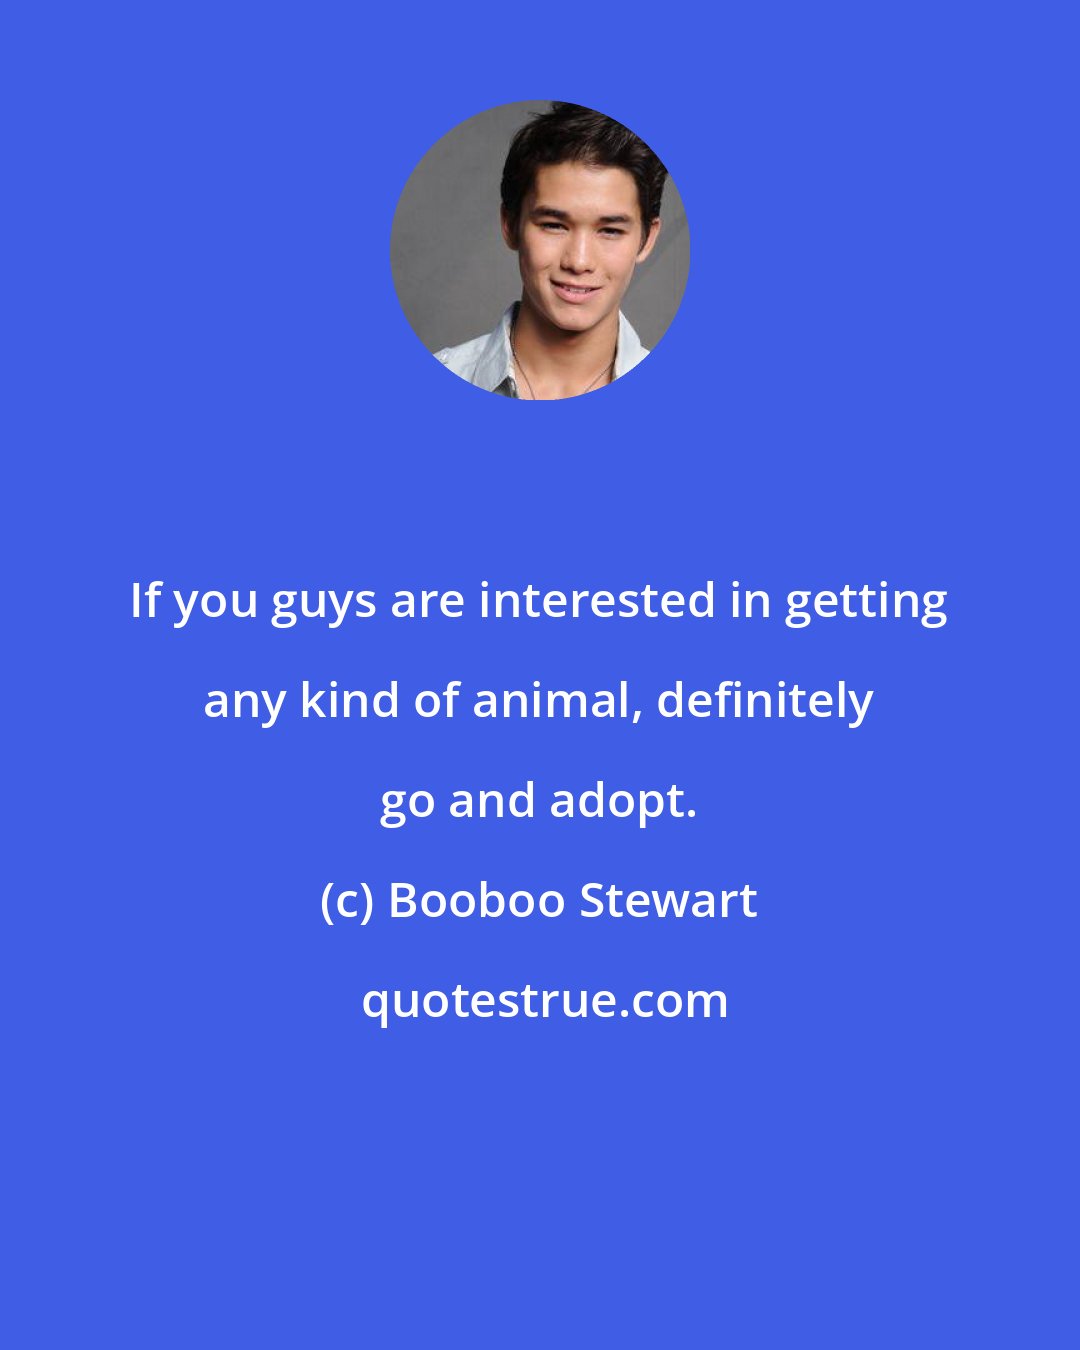 Booboo Stewart: If you guys are interested in getting any kind of animal, definitely go and adopt.